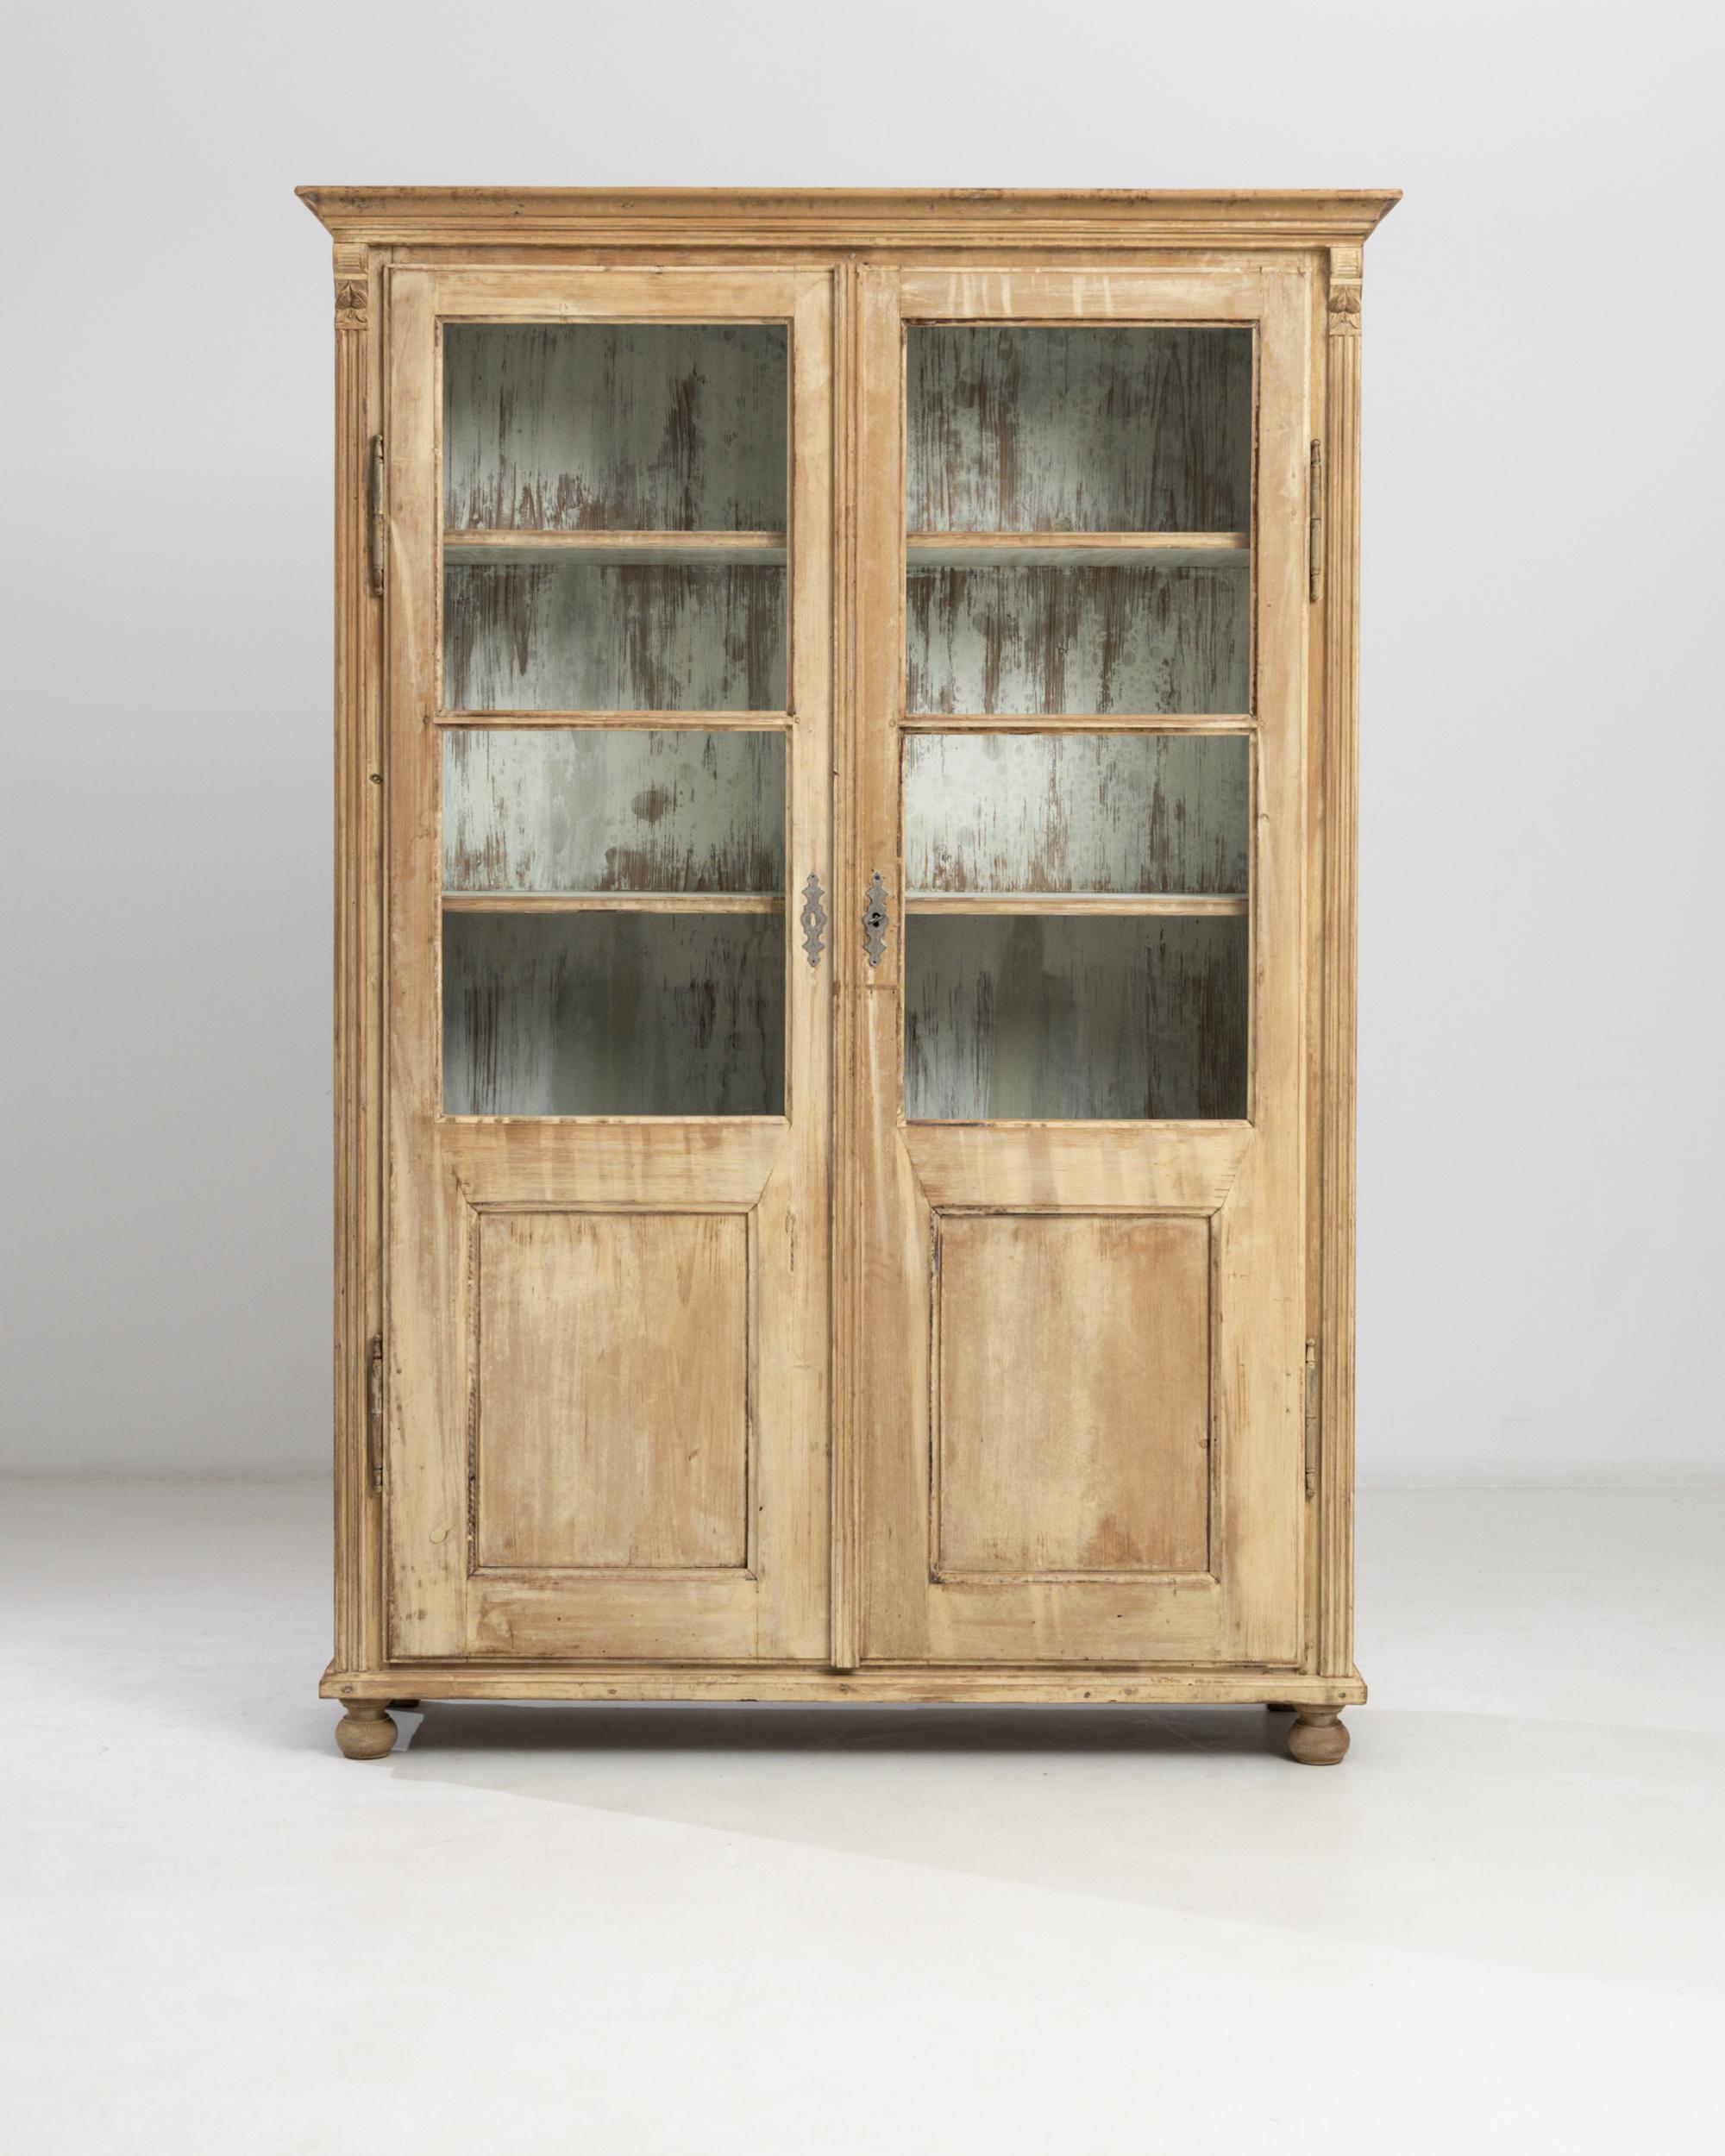 A pair of 19th century wooden vitrines from Central Europe. These tall antique chests feature glass fronts with double-doors and cornice tops, resting on wide bun feet. The four shelf interiors are painted in a pearly white with a charming brushed